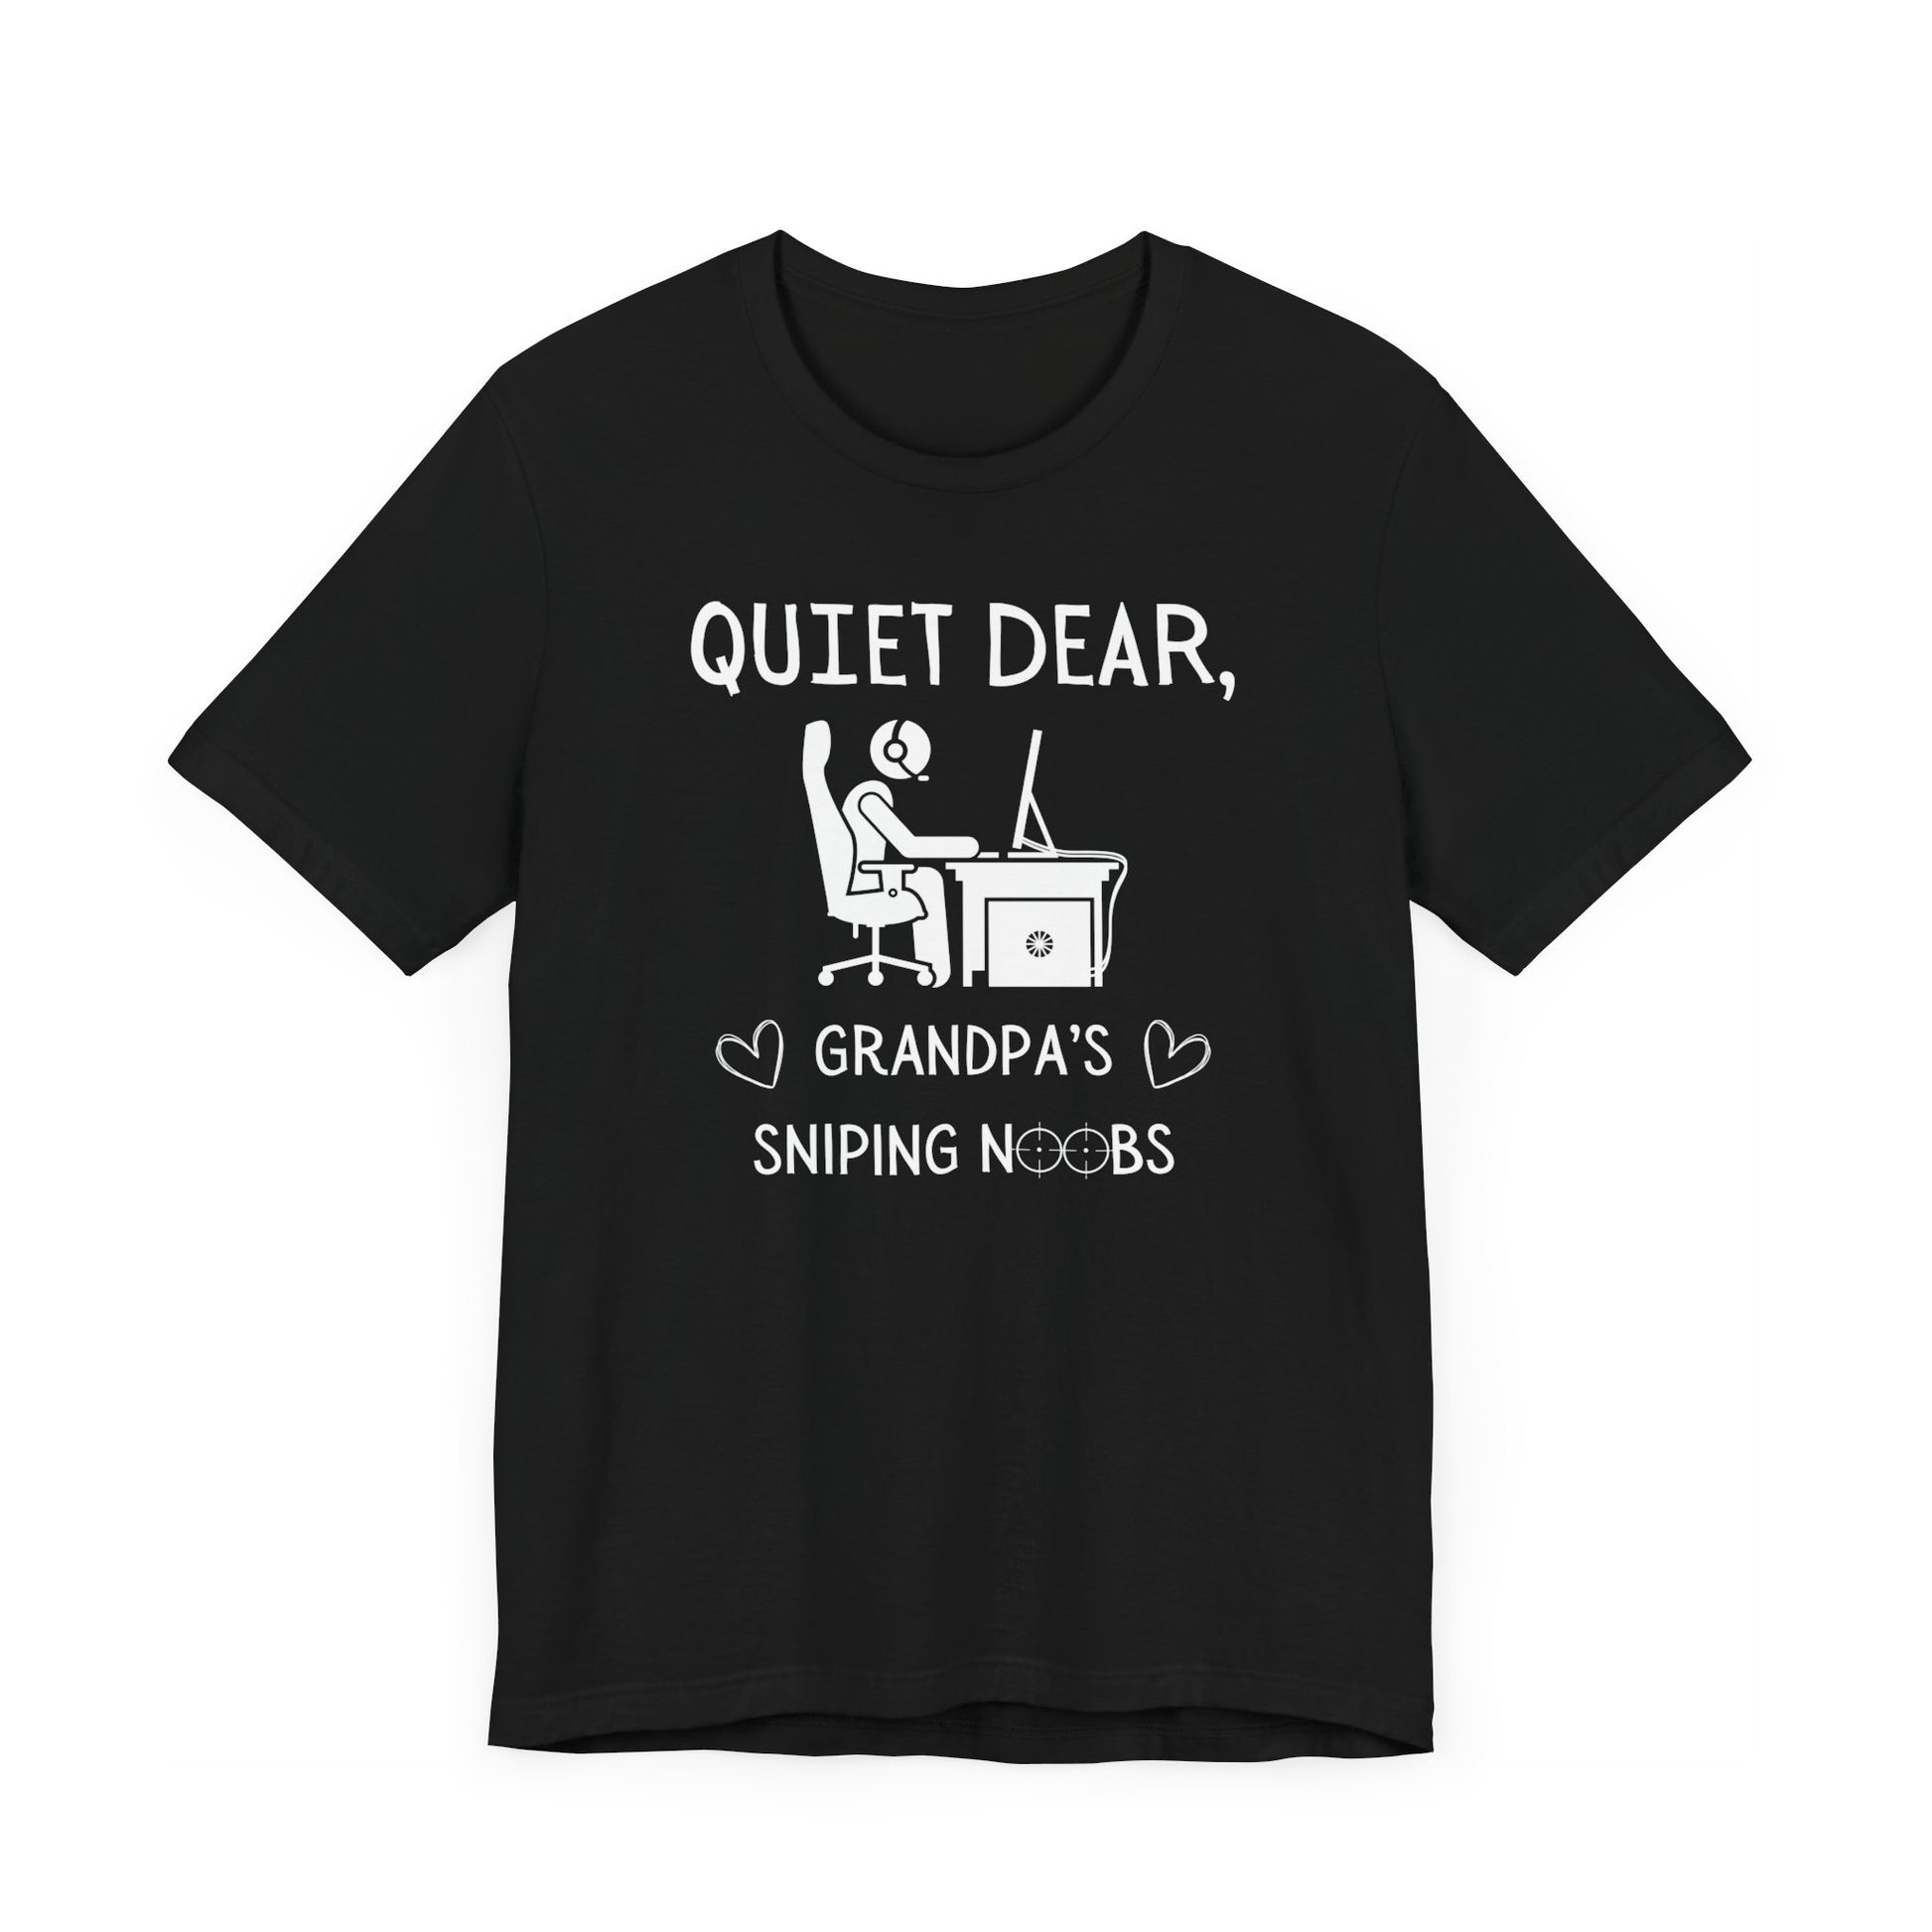 A flat image of a black t-shirt that reads Quiet Dear, Grandpa's Sniping Noobs in white text. The lower text is framed by two hearts, and the O's are in the shape of sniper scopes. In the center of the shirt is an image of a person at a desk with a gaming PC.